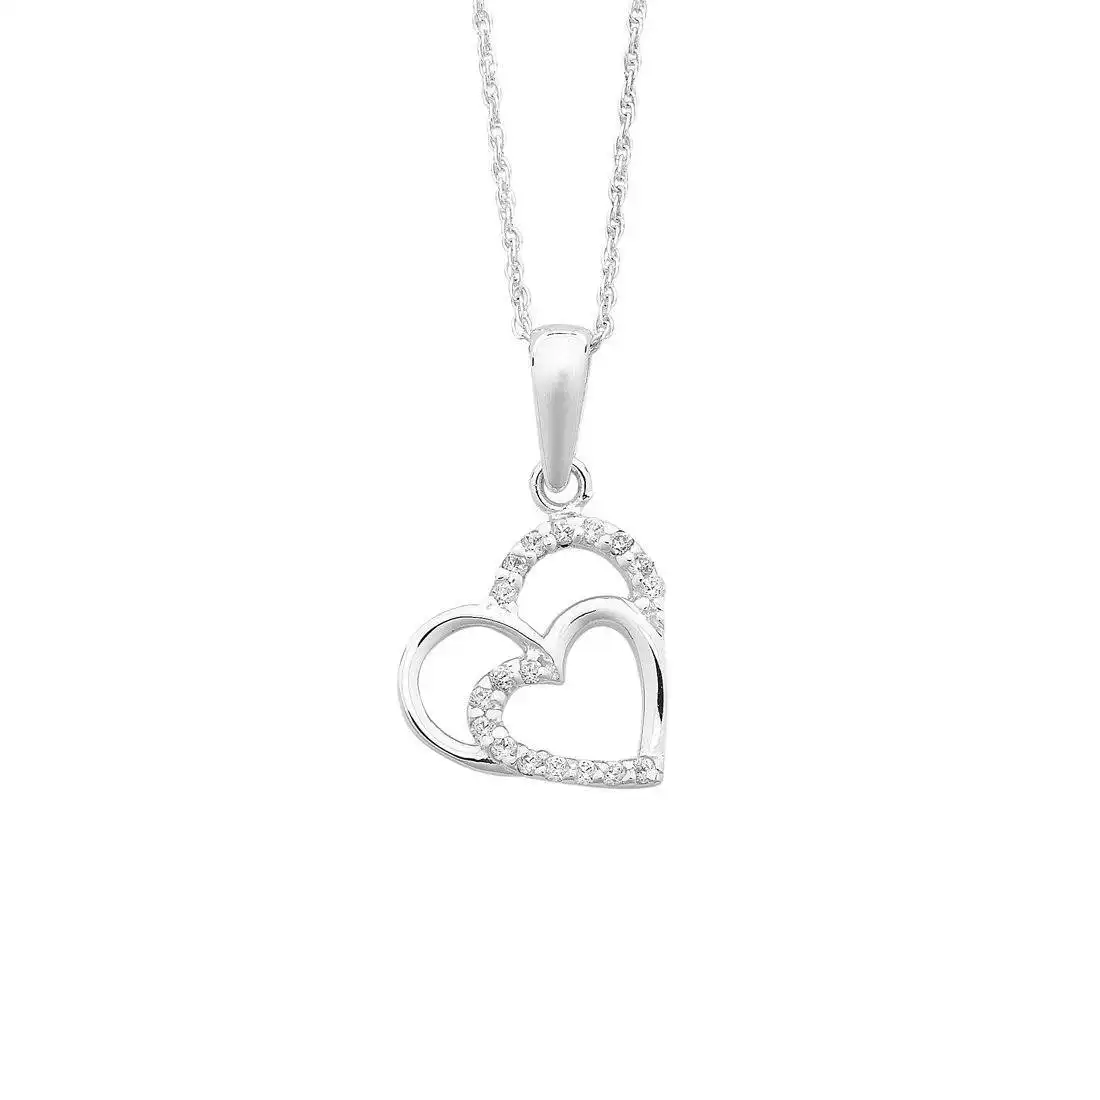 45cm Sterling Silver Double Open Heart Cubic Zirconia Necklace